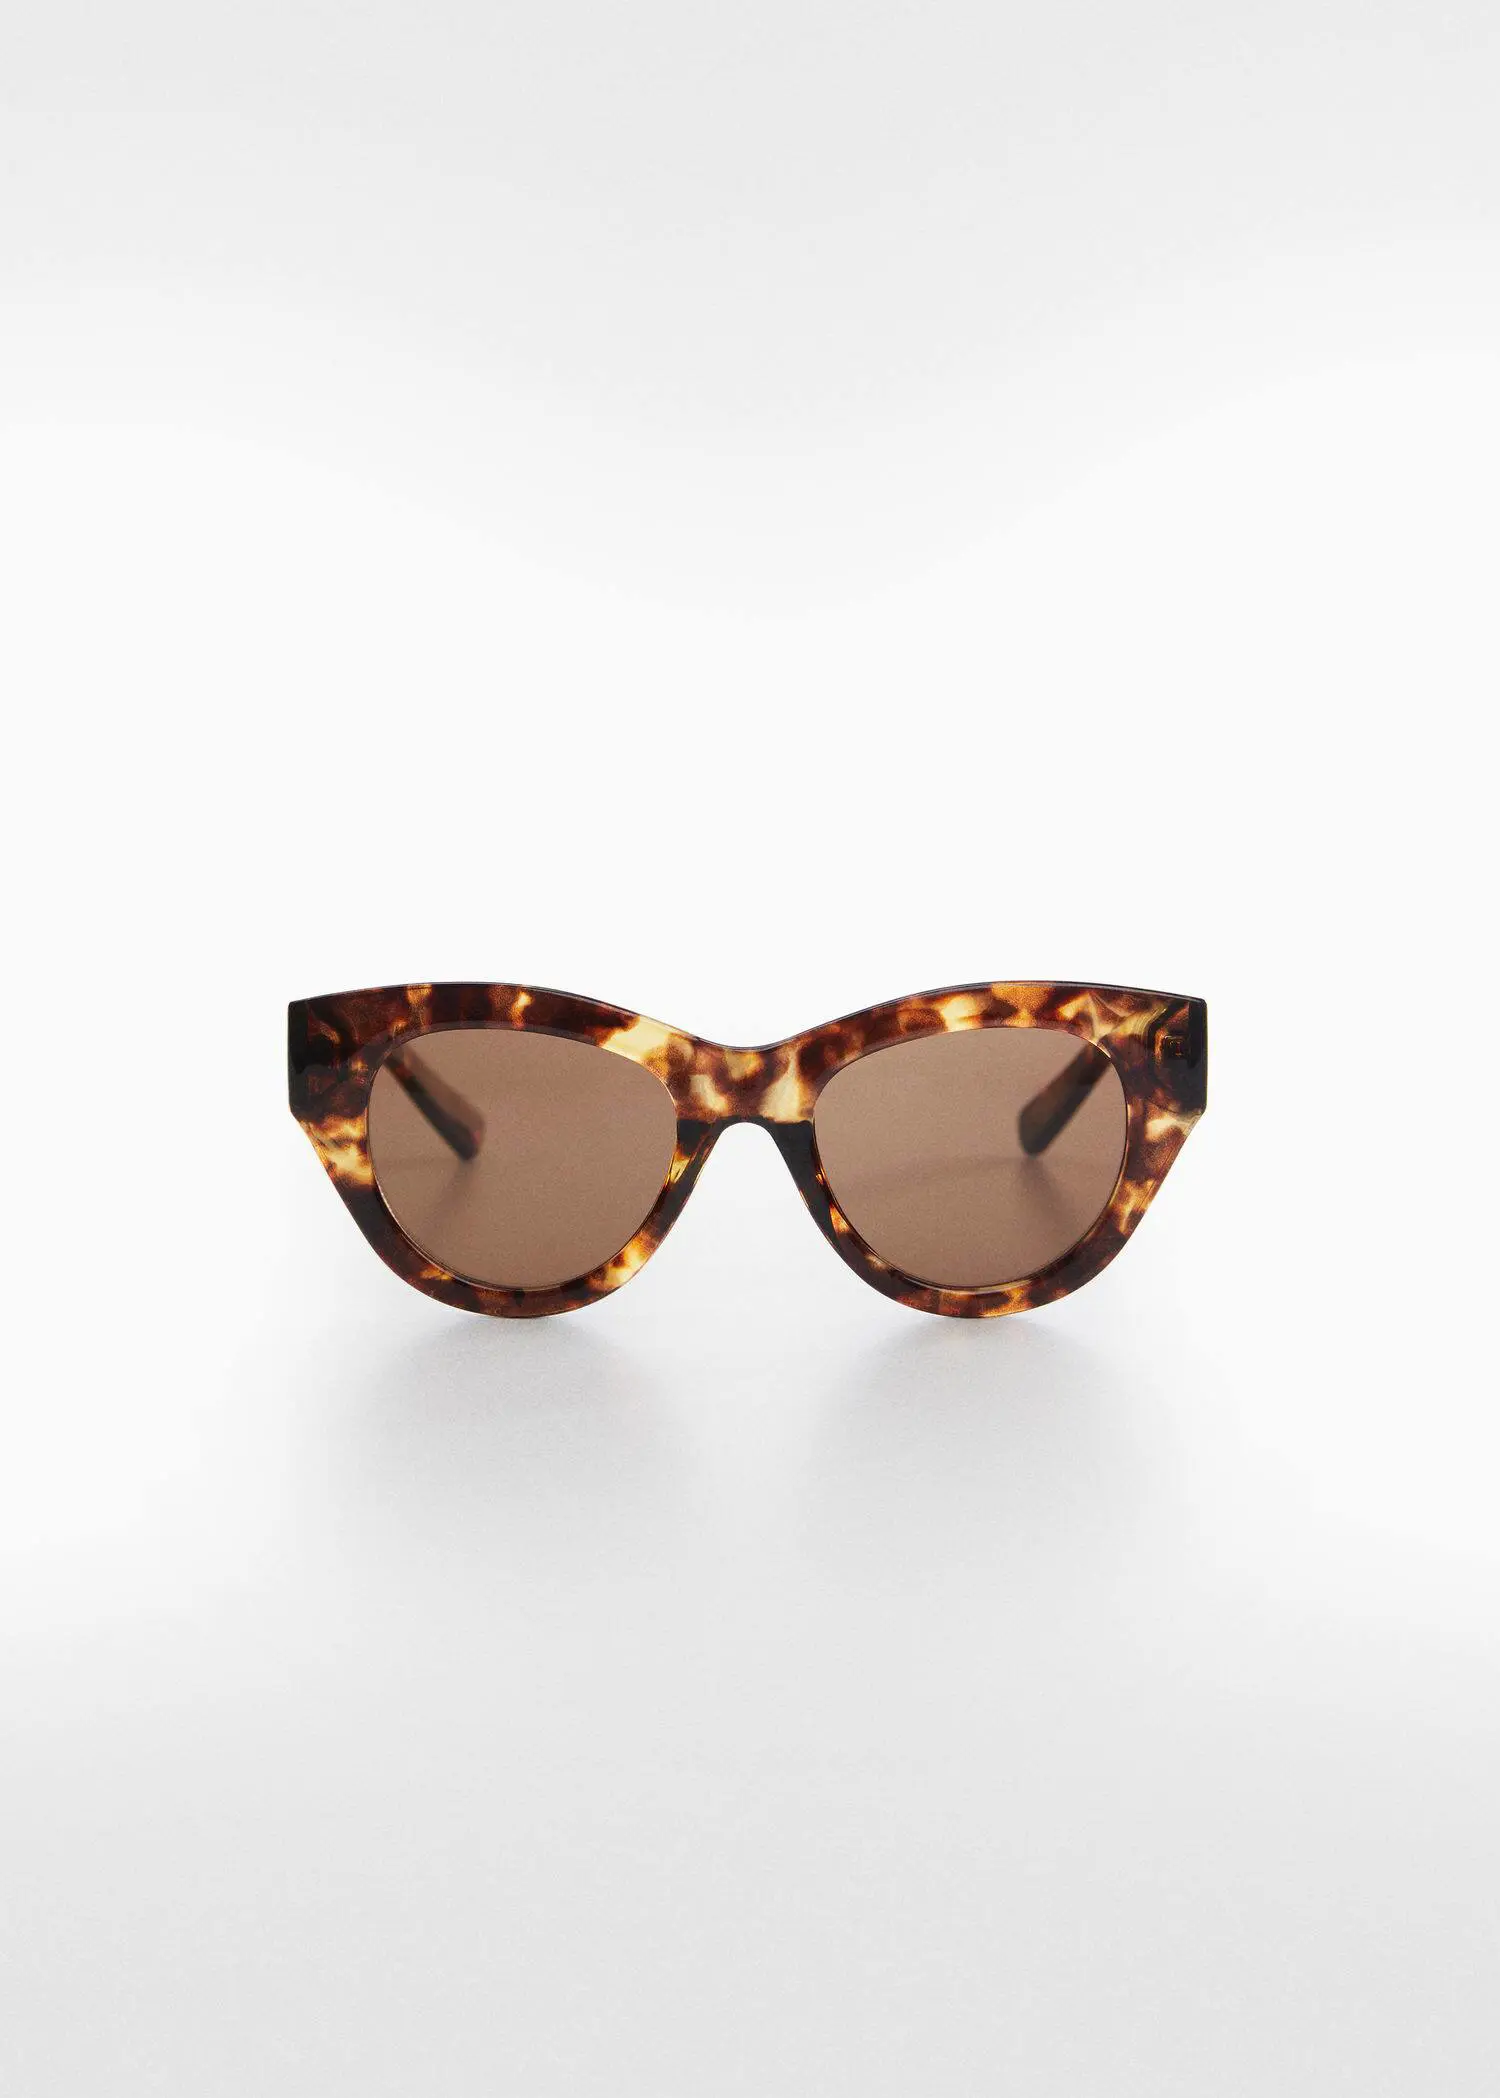 Mango Rounded sunglasses. a pair of brown sunglasses sitting on top of a white table. 